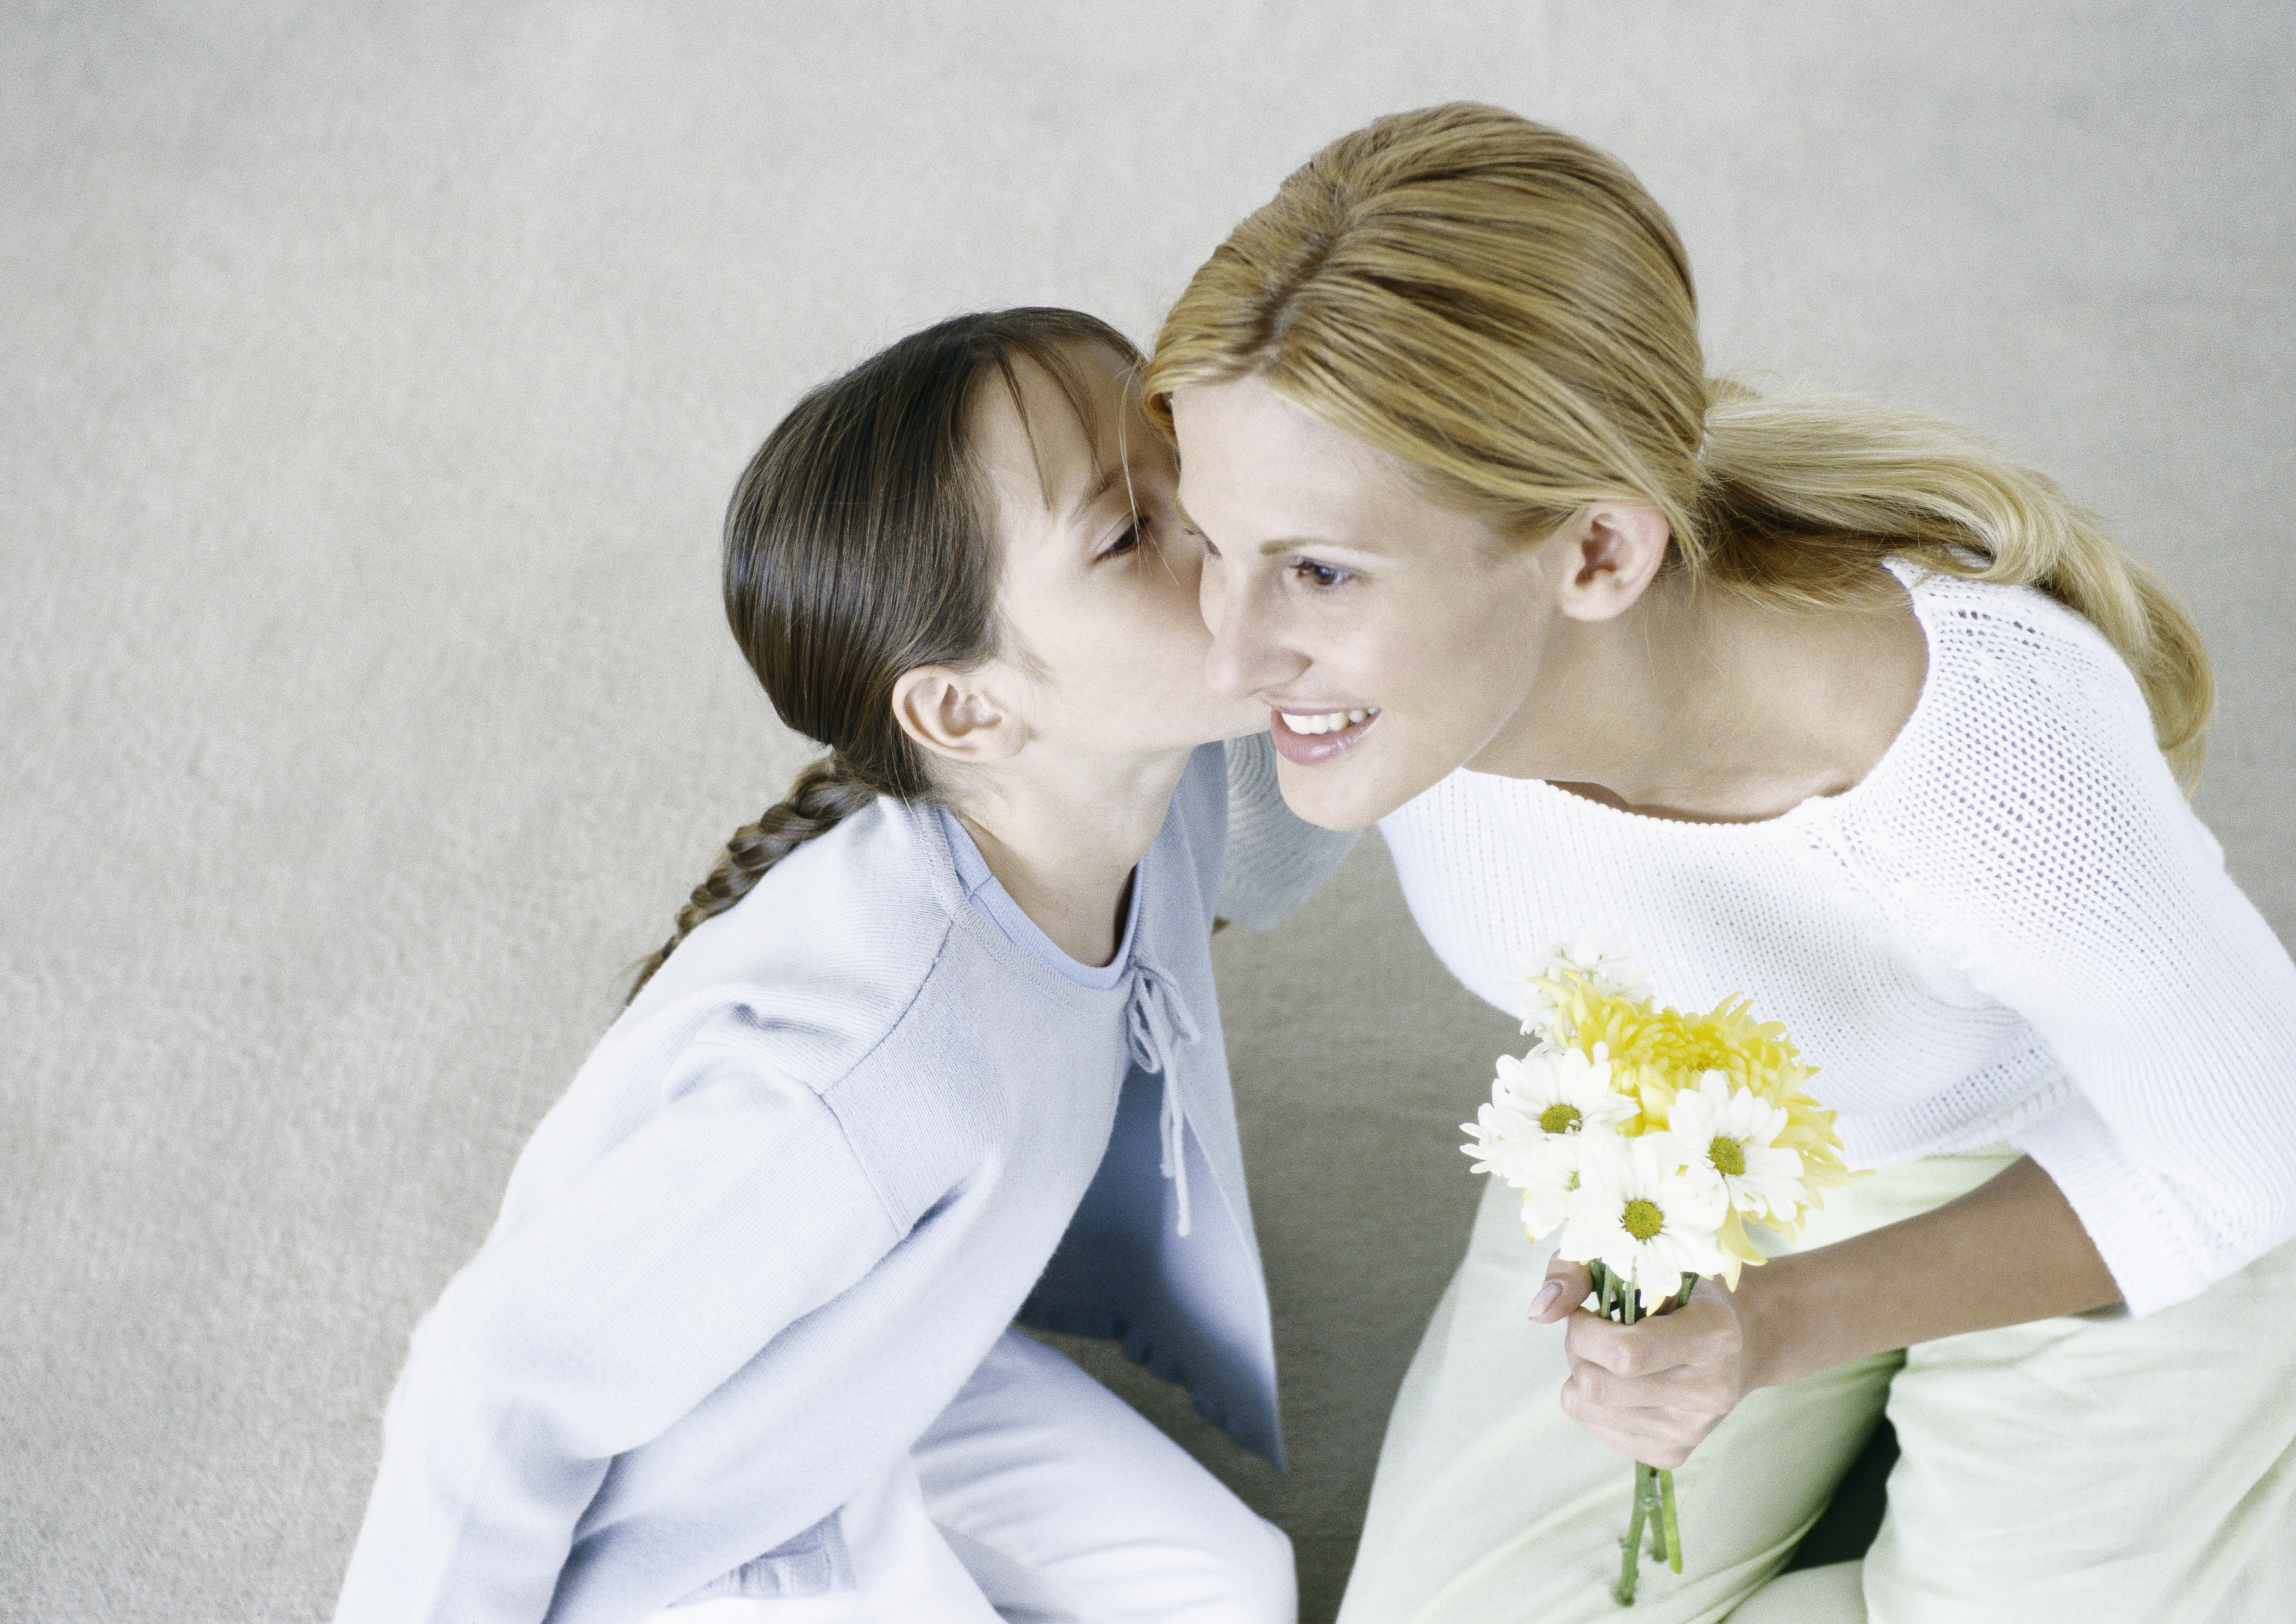 Woman holding bouquet of flowers, girl kissing her cheek | Source: Getty Images